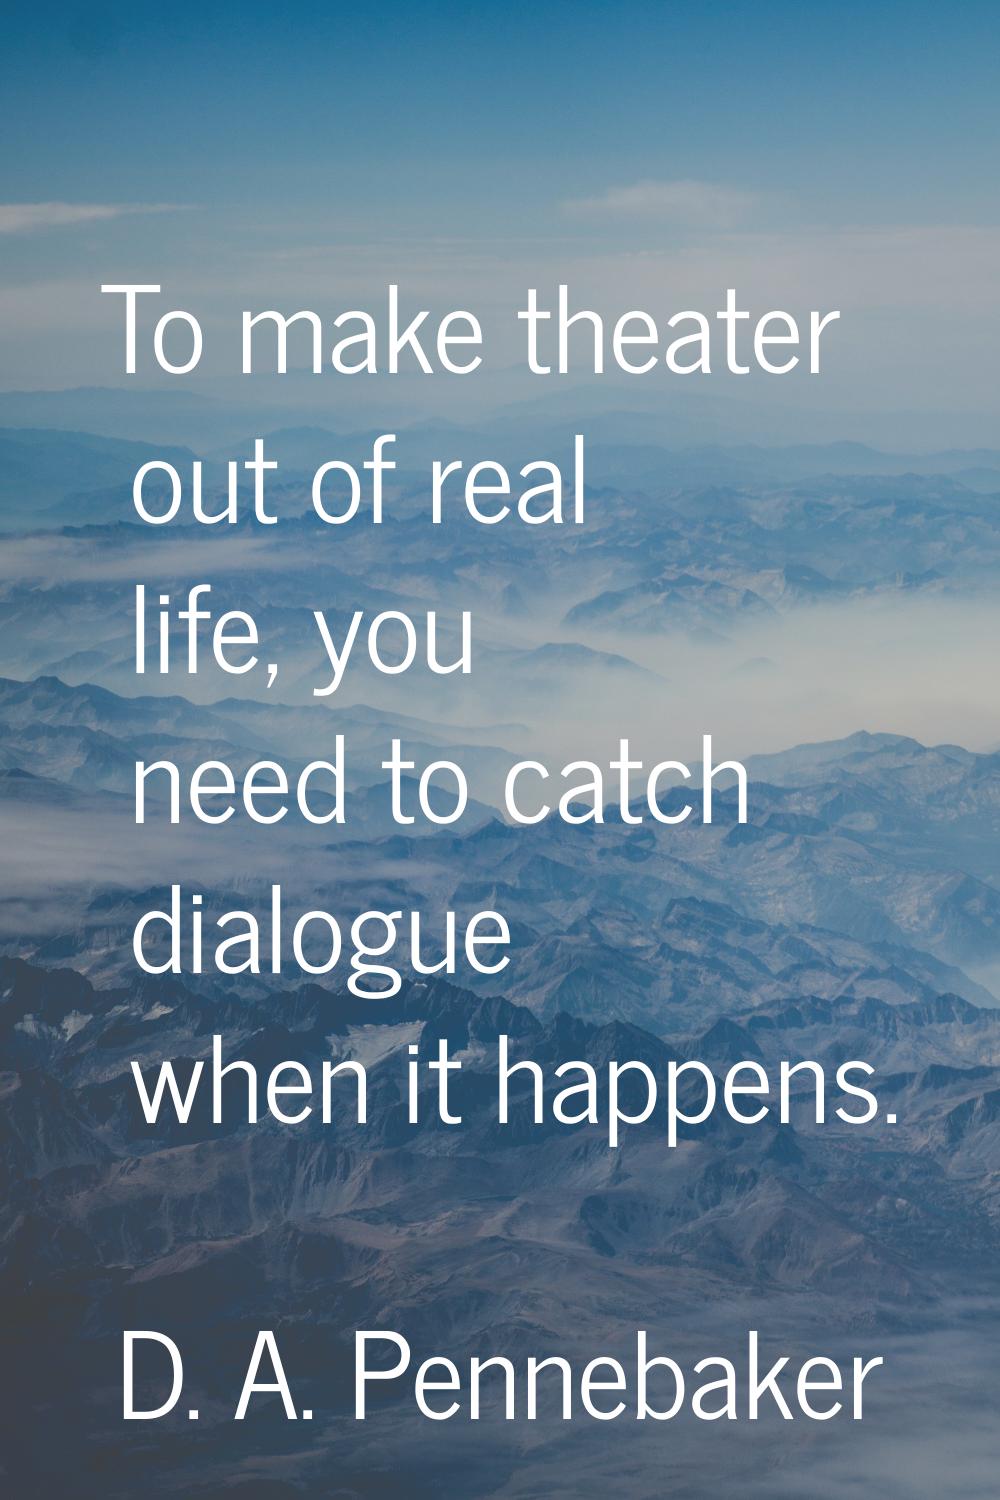 To make theater out of real life, you need to catch dialogue when it happens.